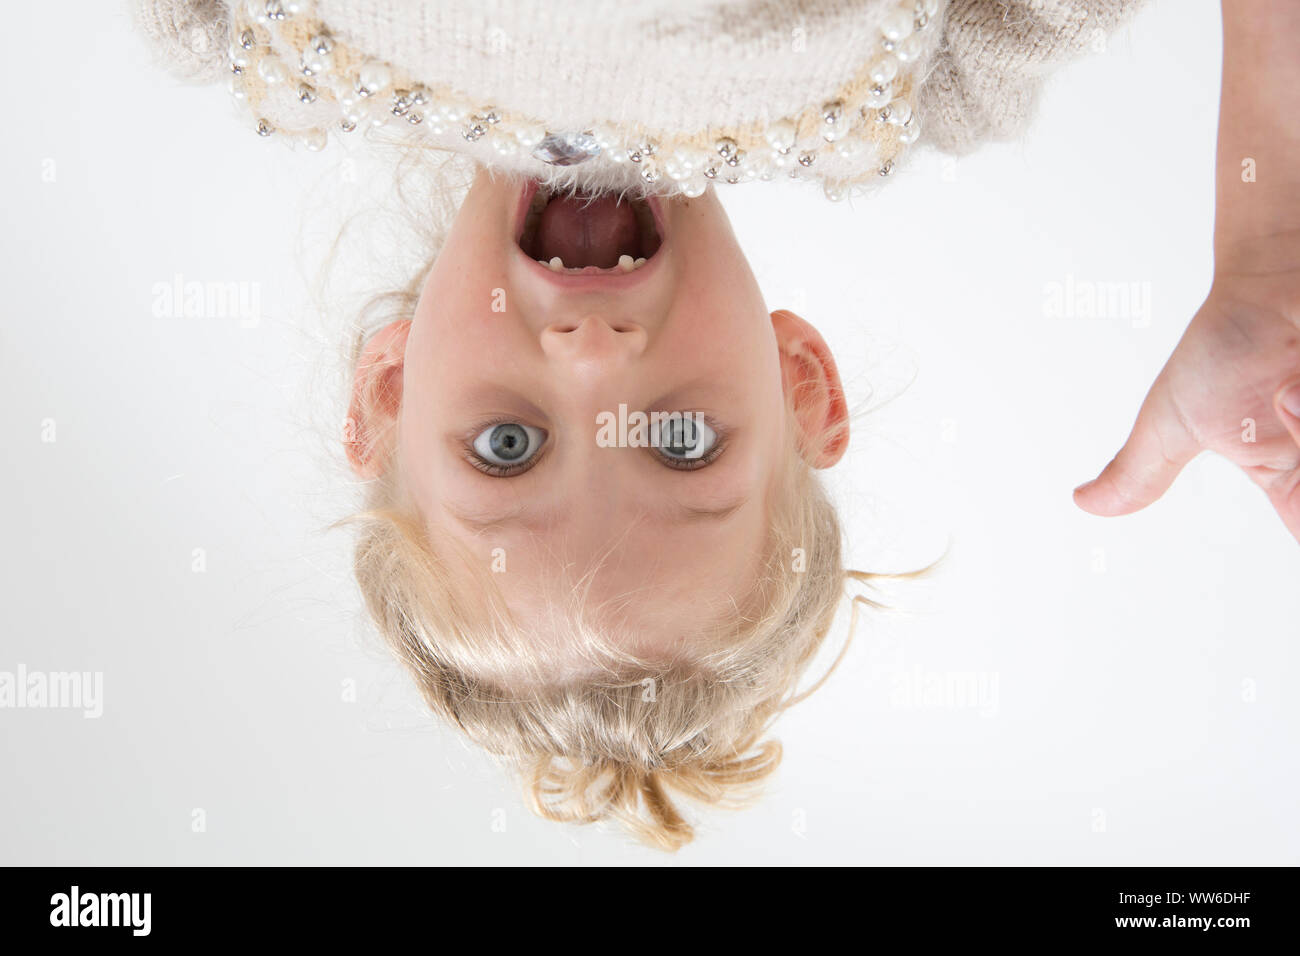 Child with tooth gap on the head, portrait Stock Photo